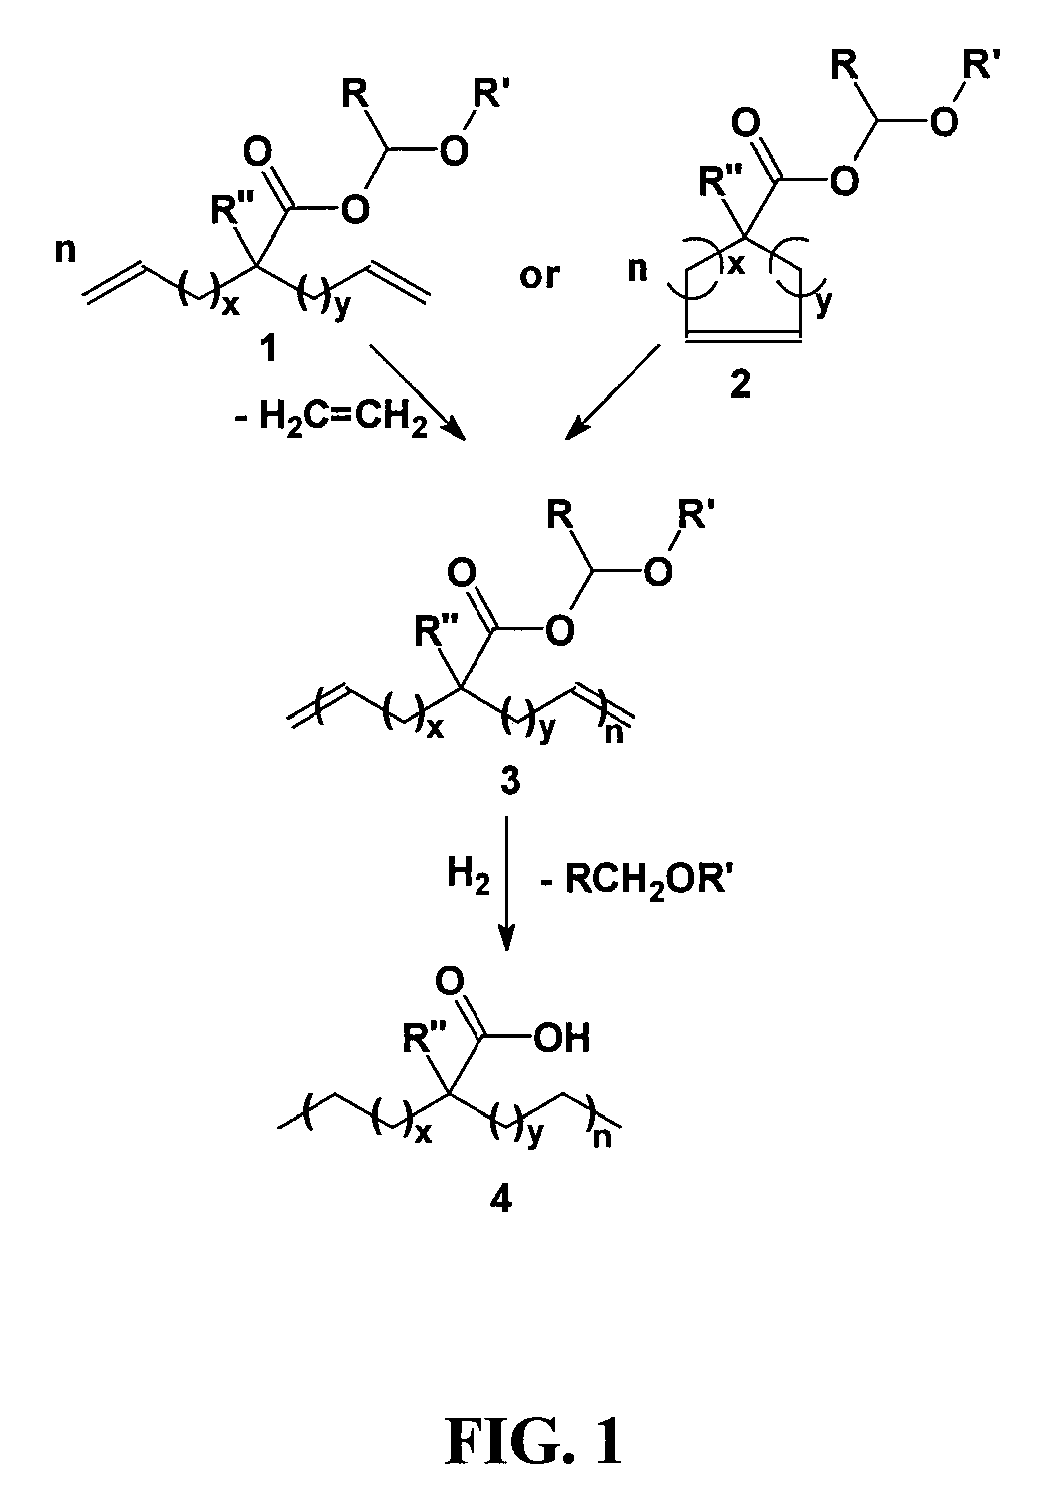 Highly organized polyolefin structures